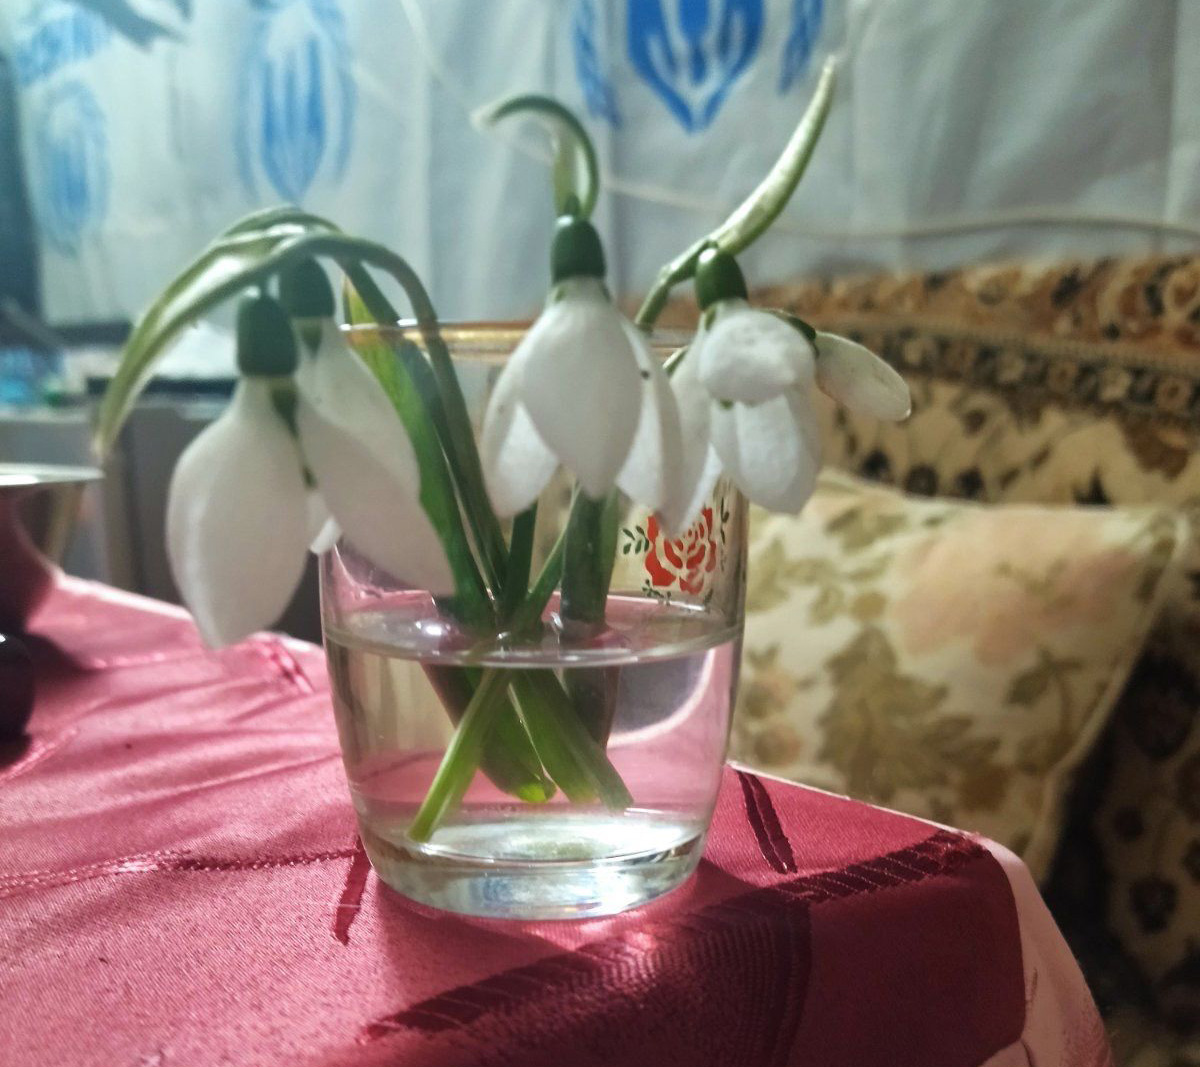 A small bunch of snowdrops sits on an improvised table in a basement in Bakhmut, Ukraine.